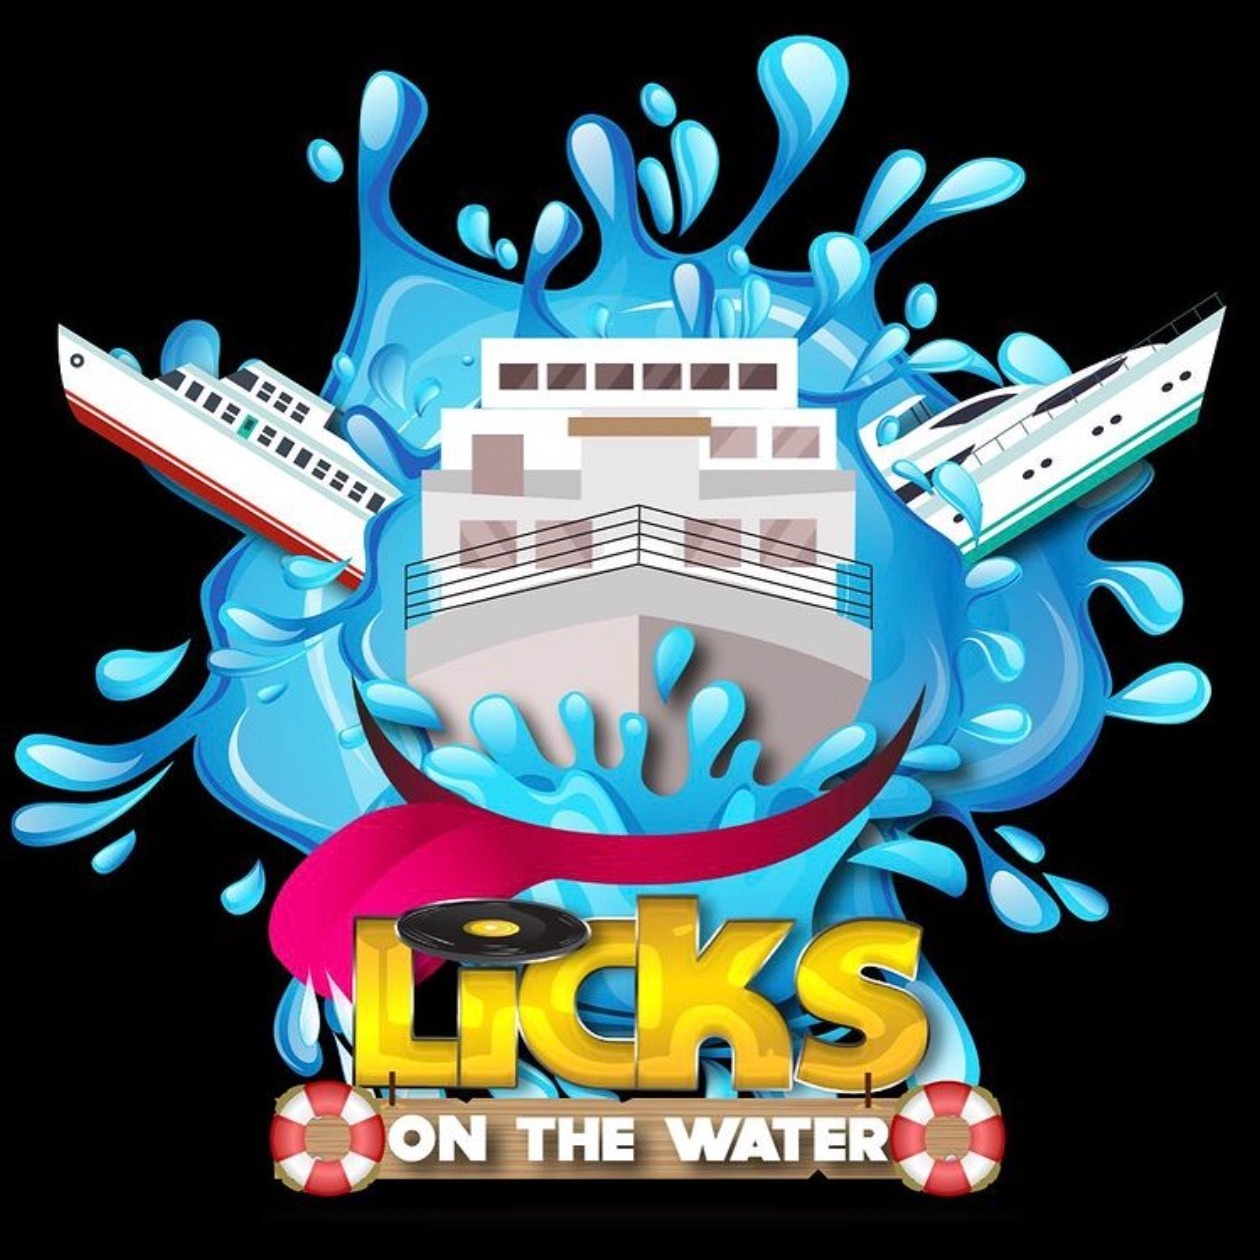 LiCKS ON THE WATER 2022 - TORONTO CARNIVAL MONDAY BOAT CRUISE